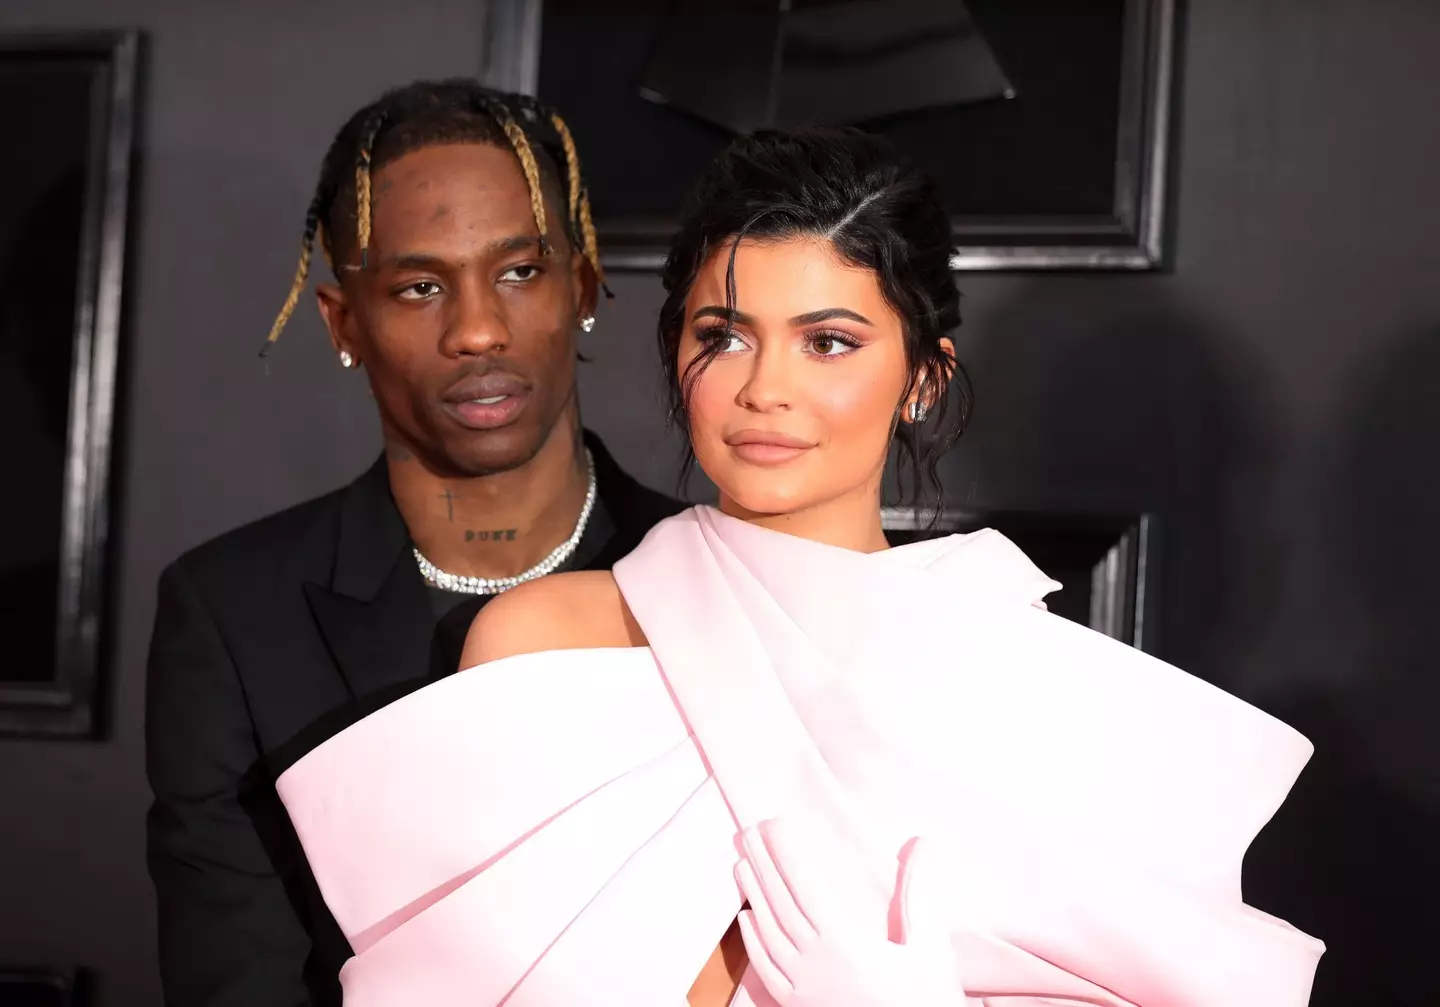 Travis Scott and Kylie Jenner have already faced tonnes of backlash for their response to the Astroworld tragedy.